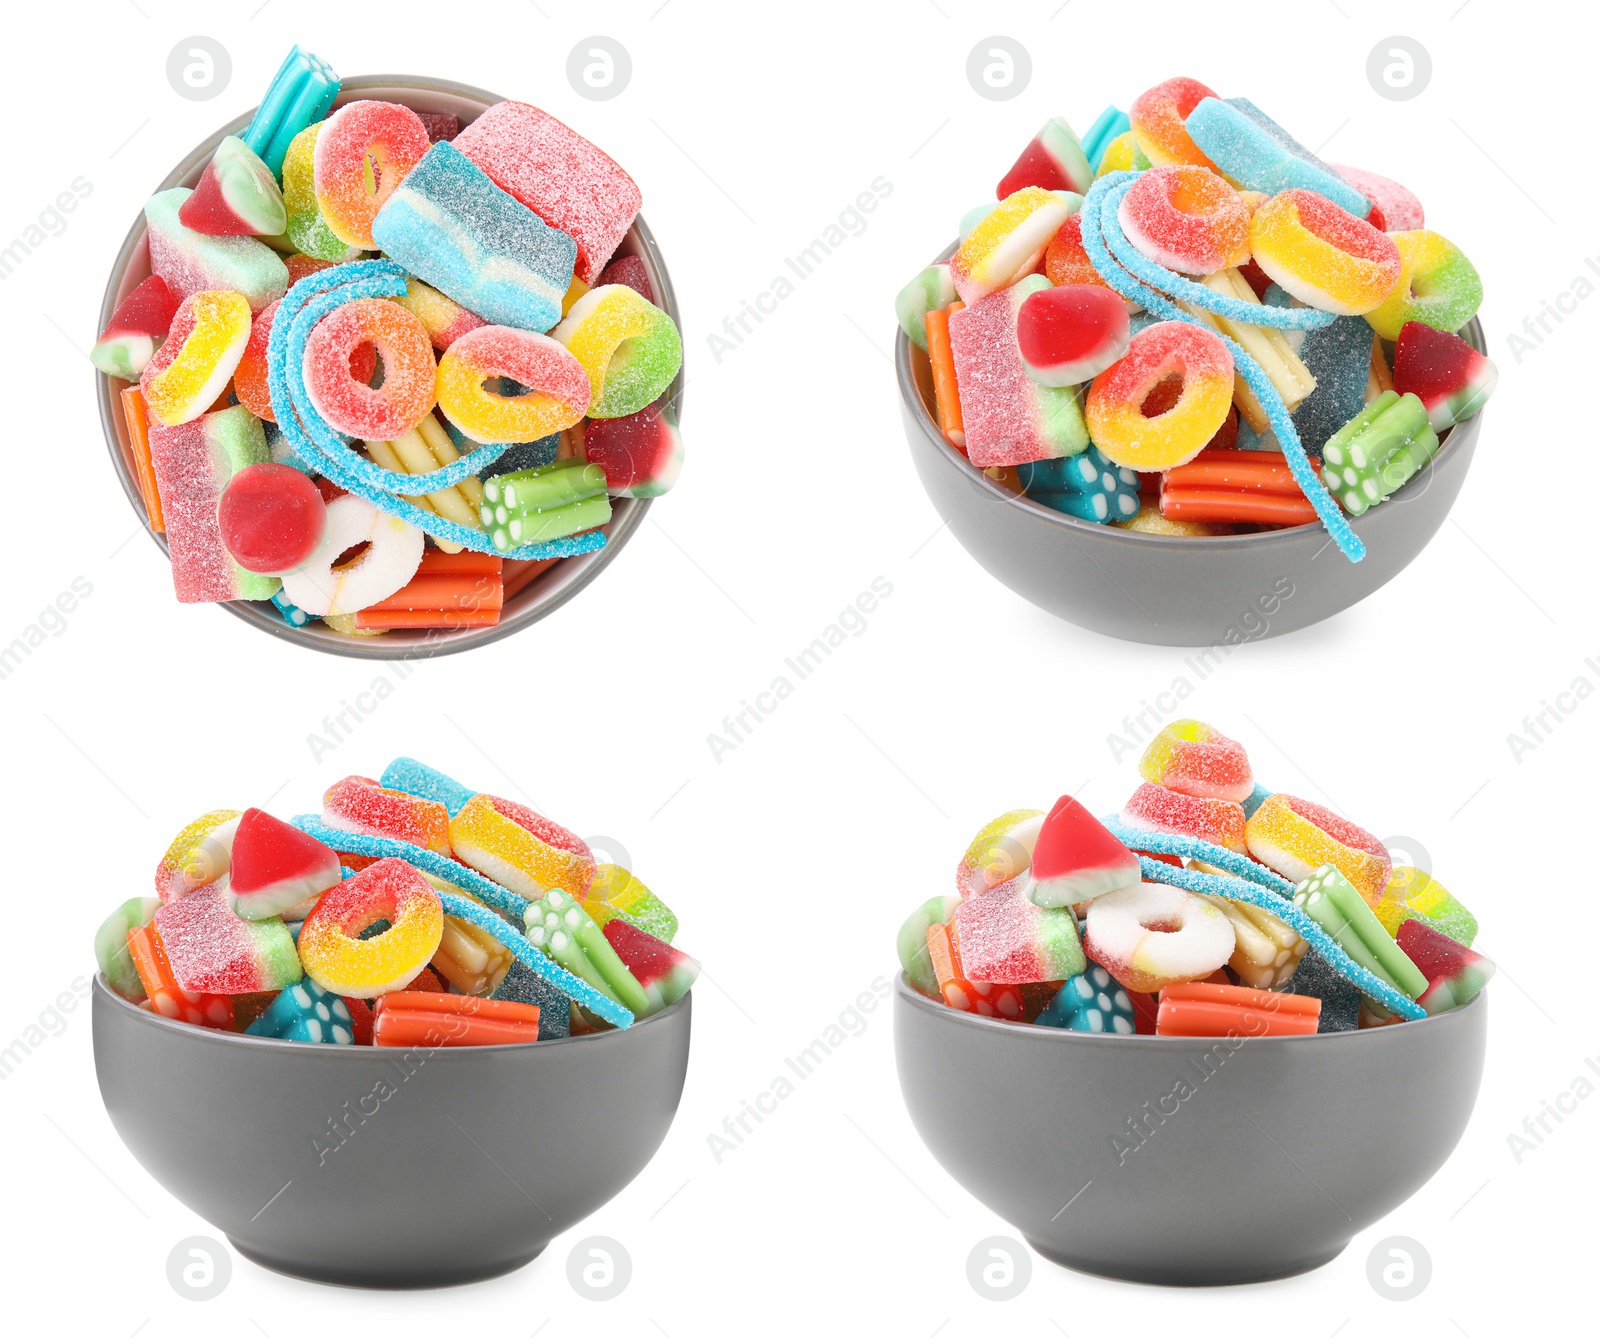 Image of Collage with bowl of tasty jelly candies on white background